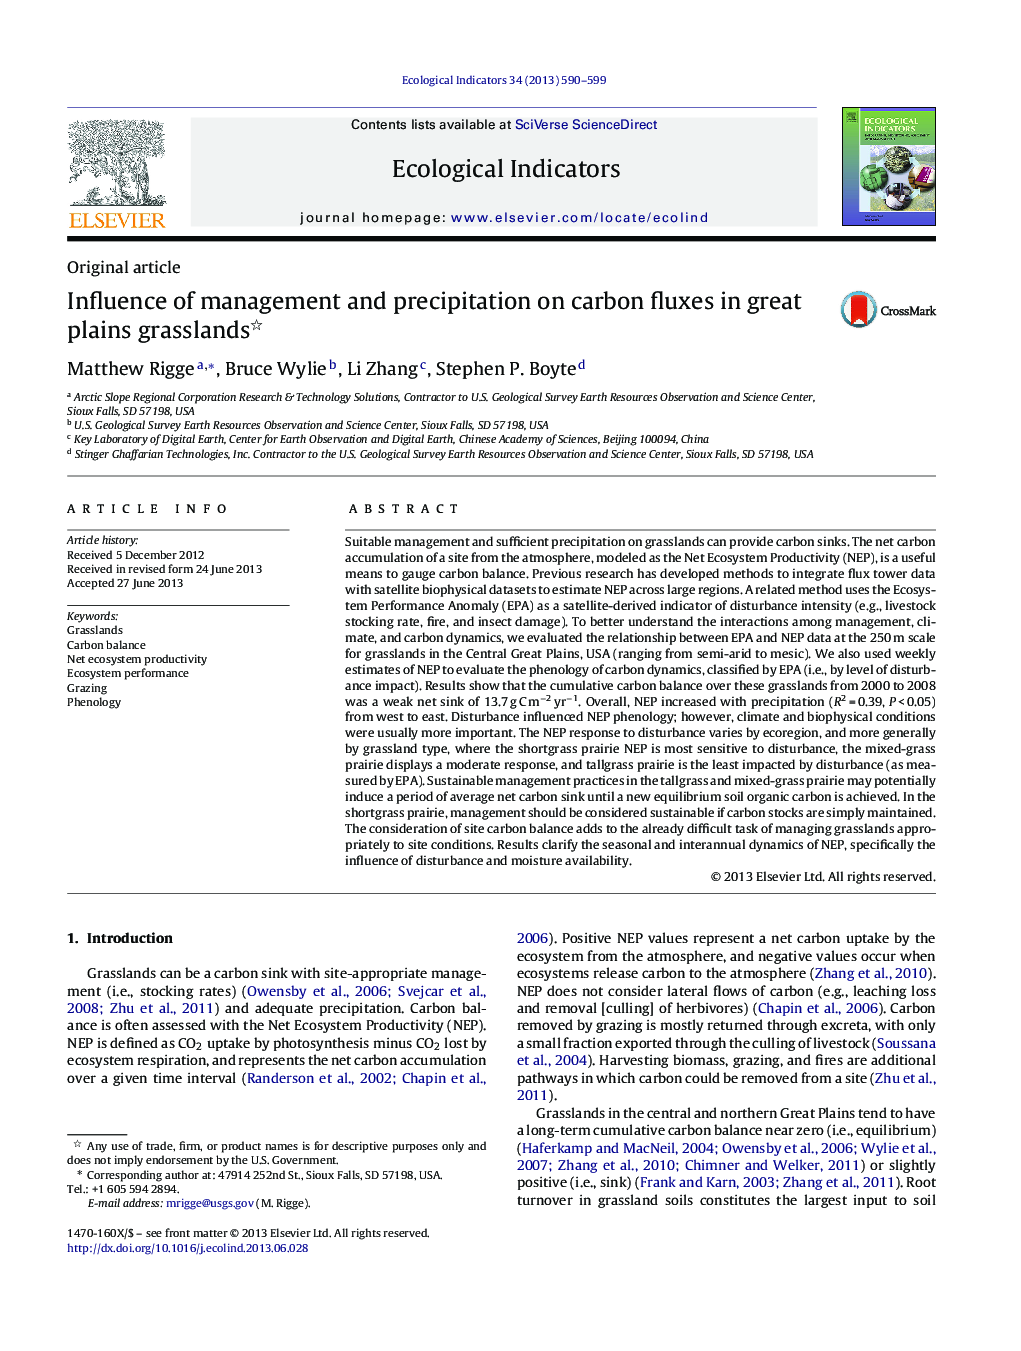 Influence of management and precipitation on carbon fluxes in great plains grasslands